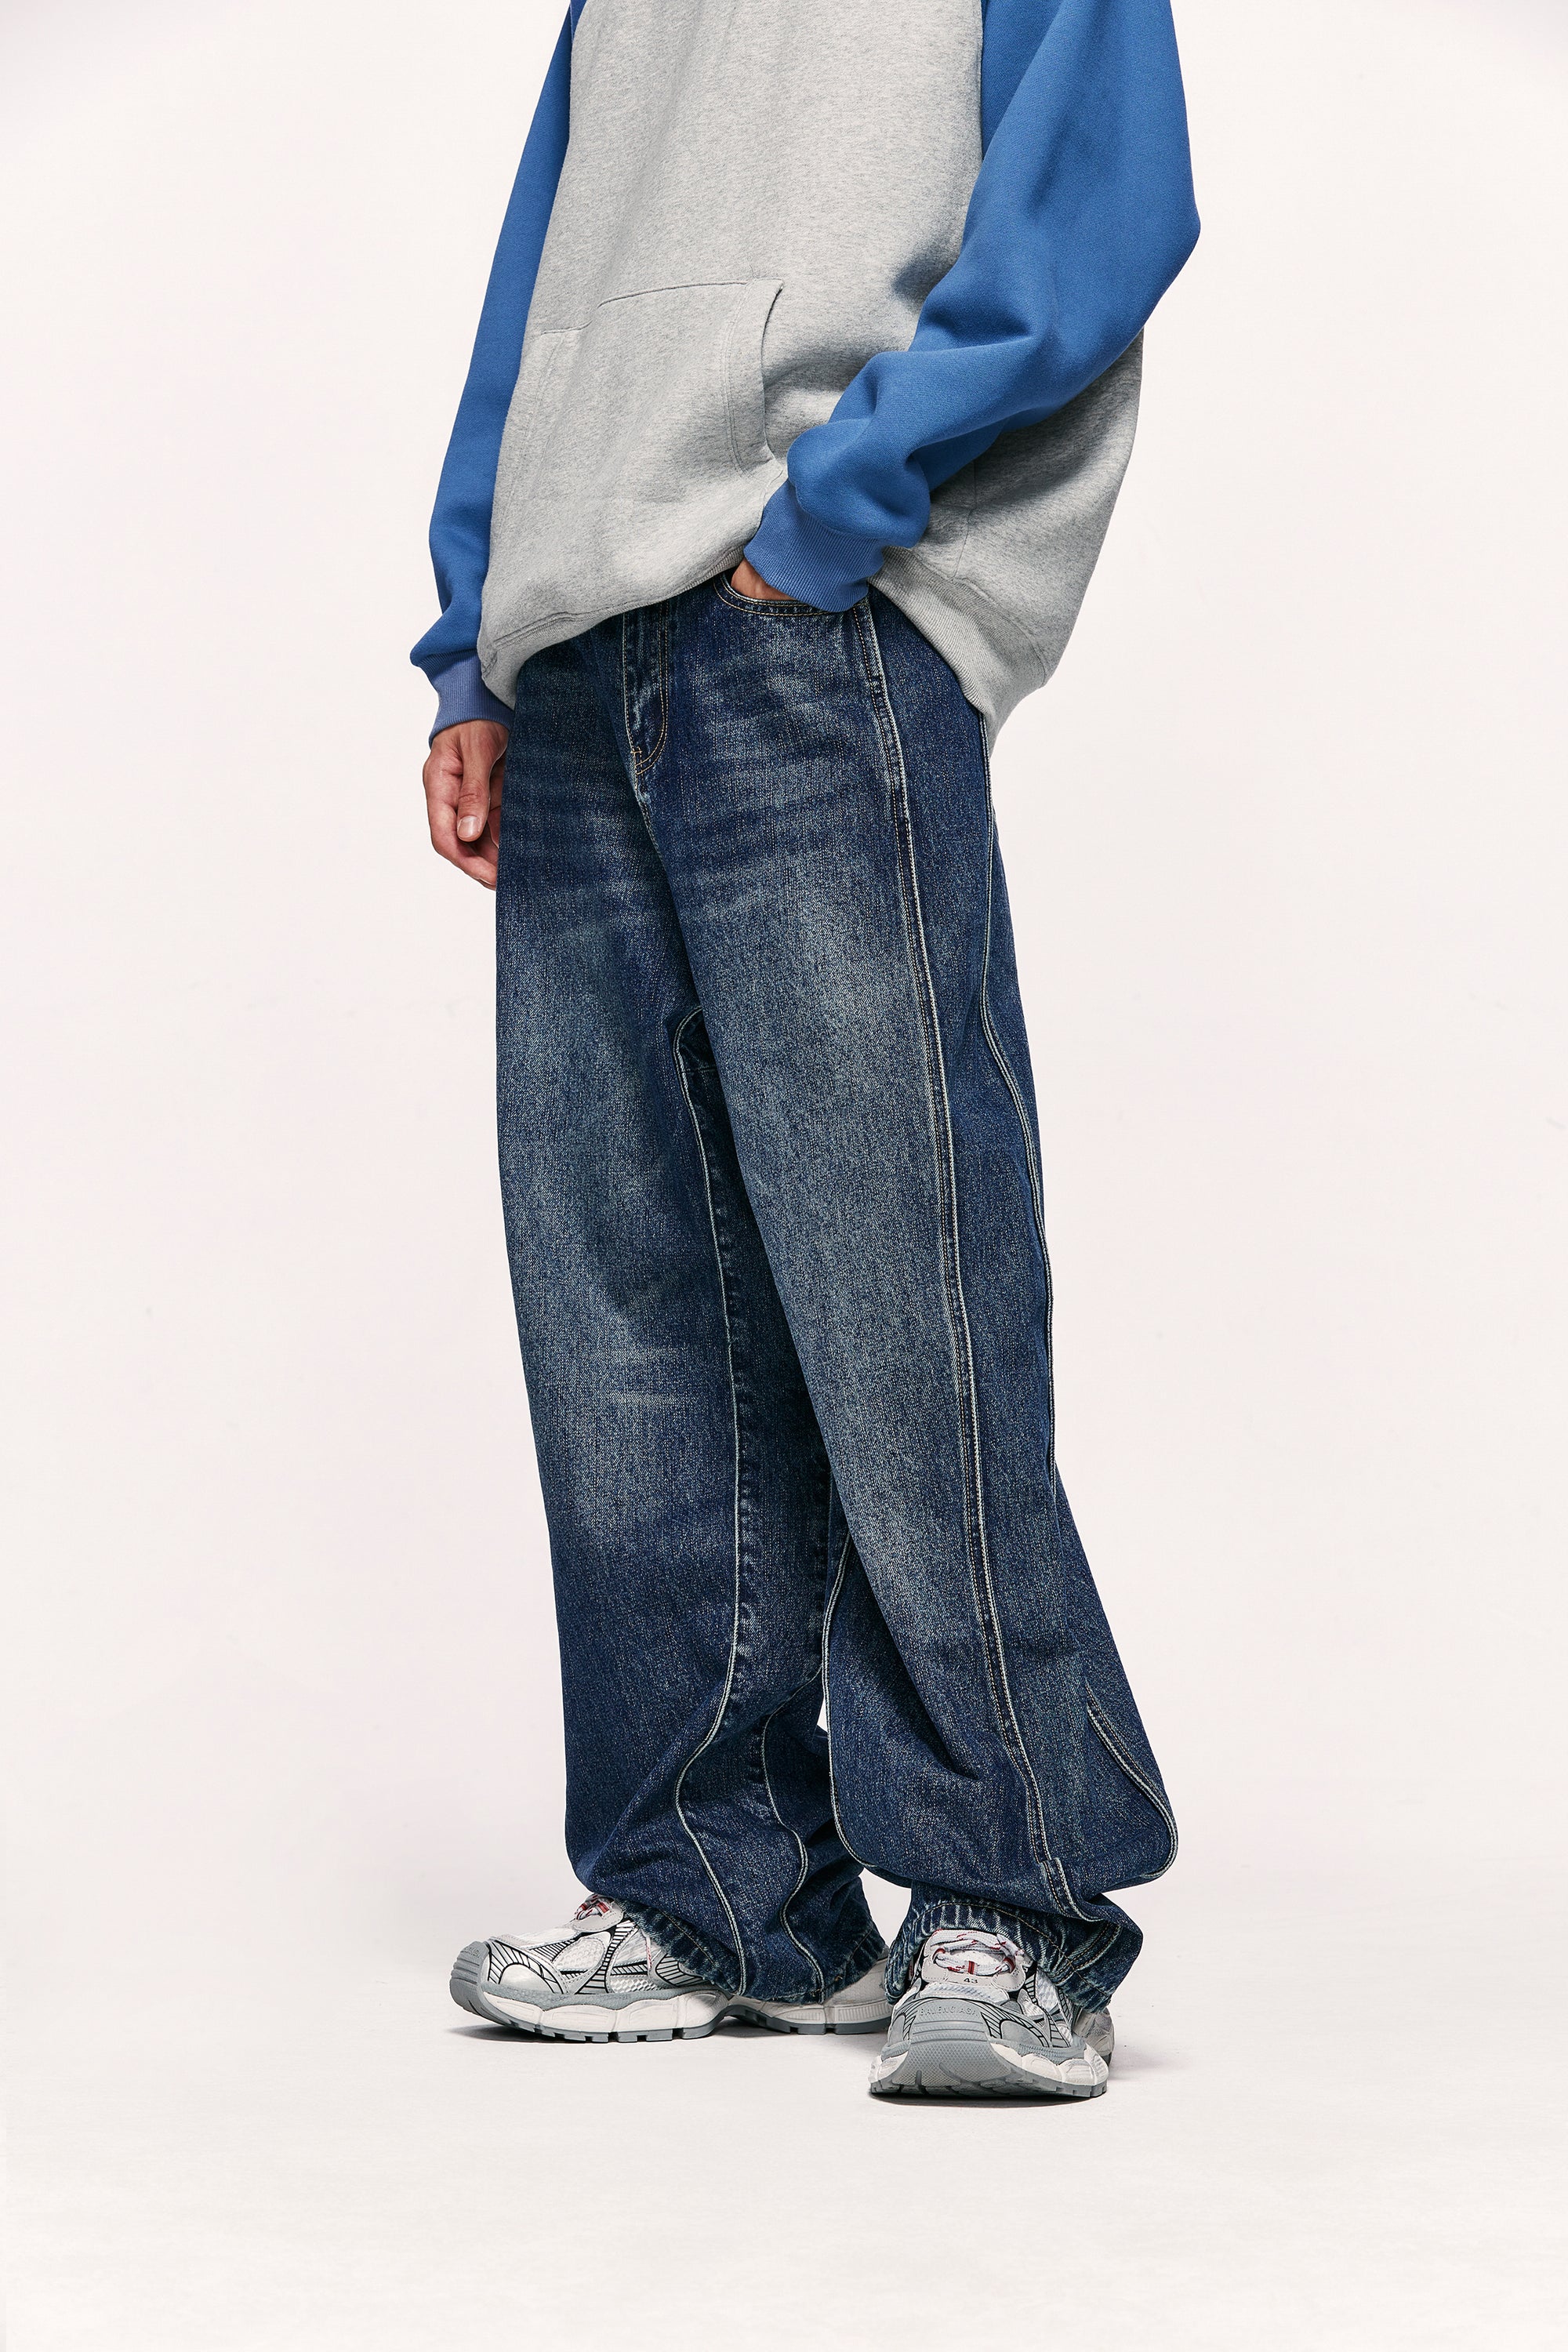 jean baggy homme